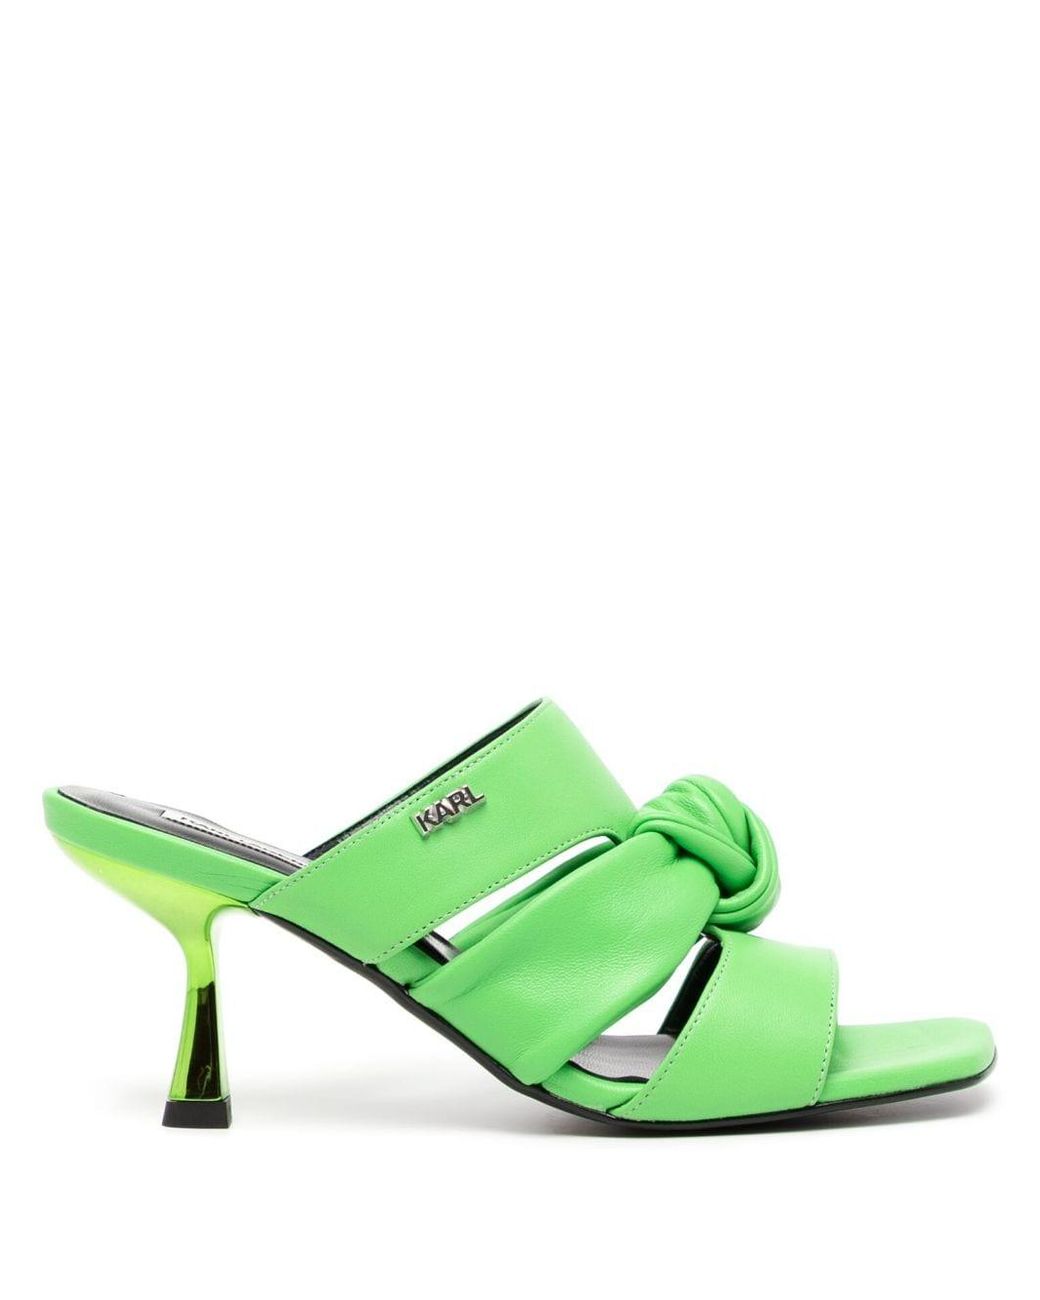 Karl Lagerfeld Panache 80mm Knot-detailing Sandals in Green | Lyst UK